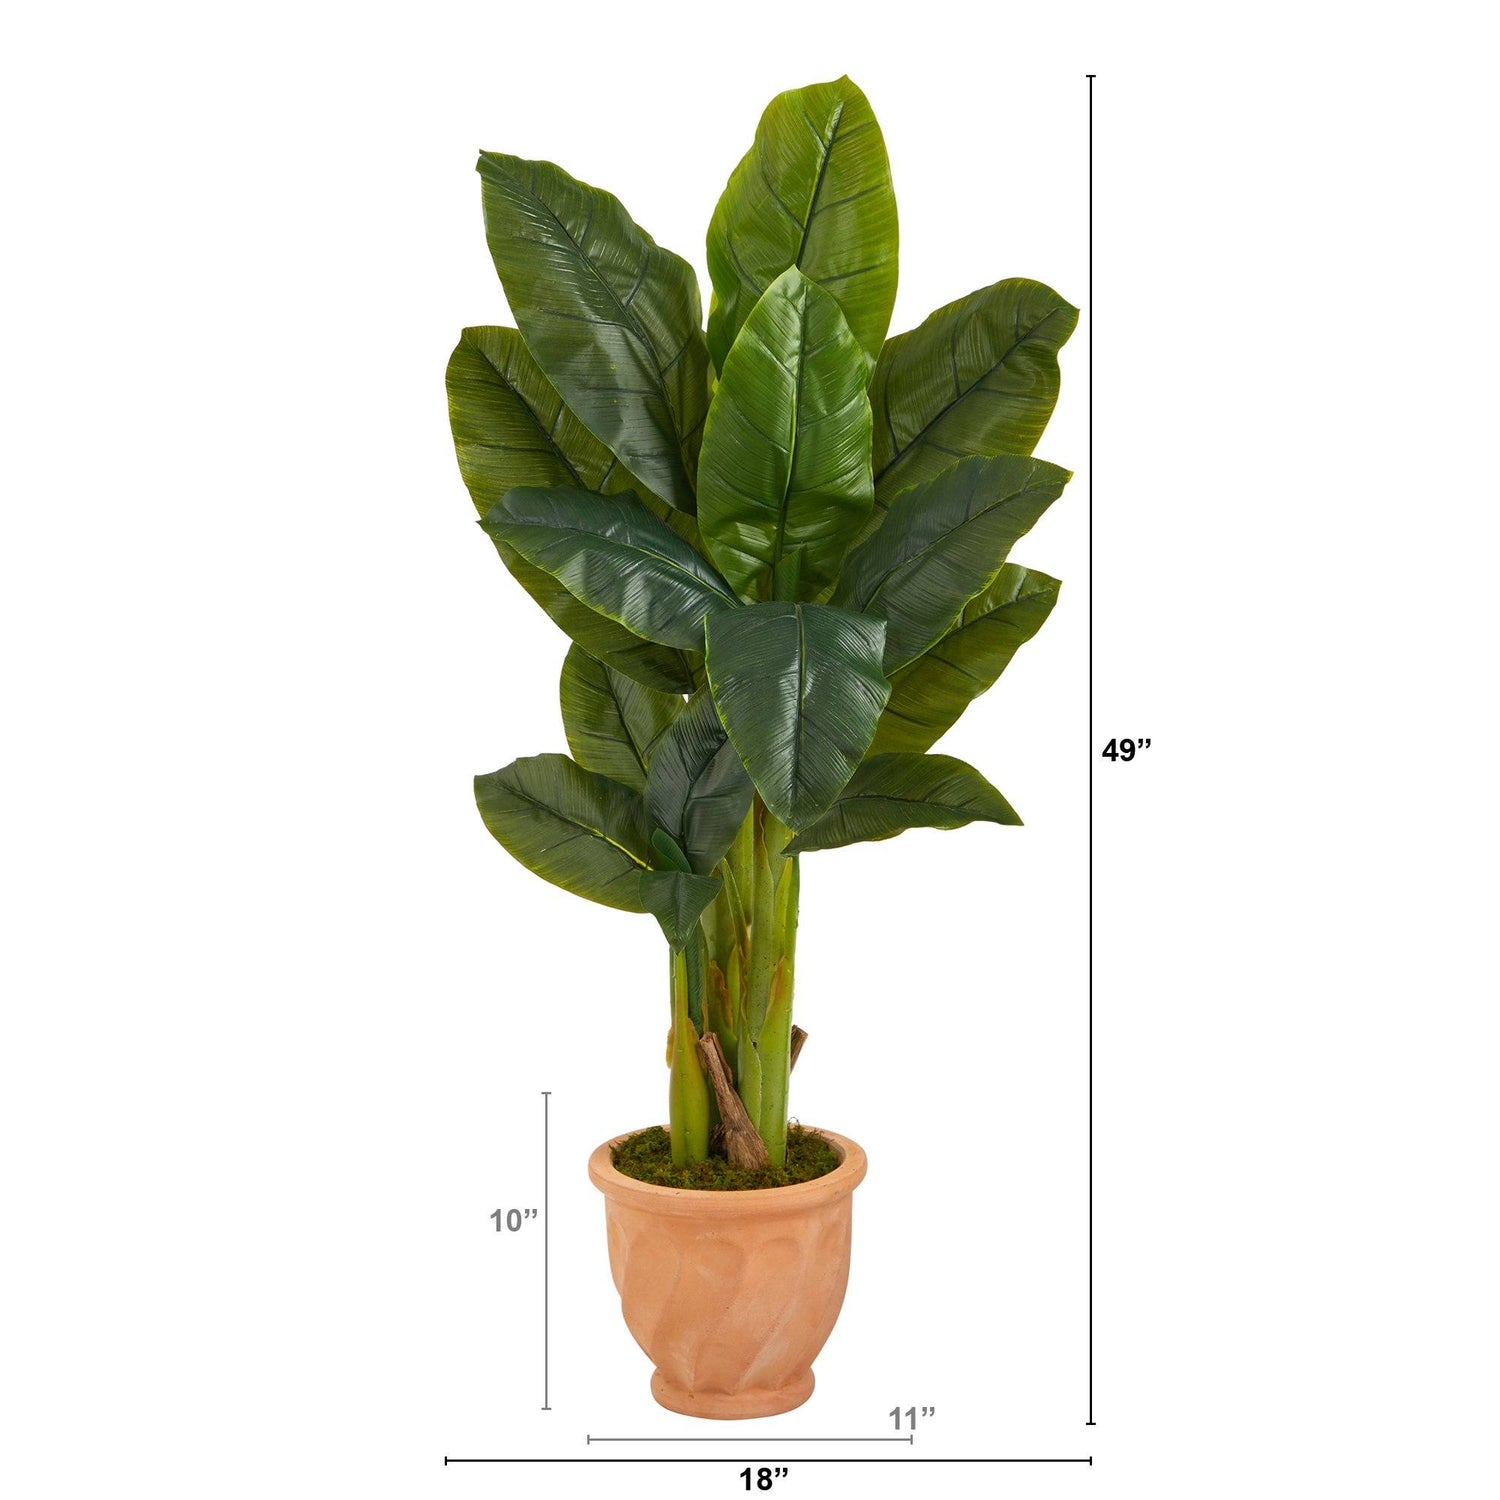 49” Triple Stalk Artificial Banana Tree in Terra-Cotta Planter (Real Touch)